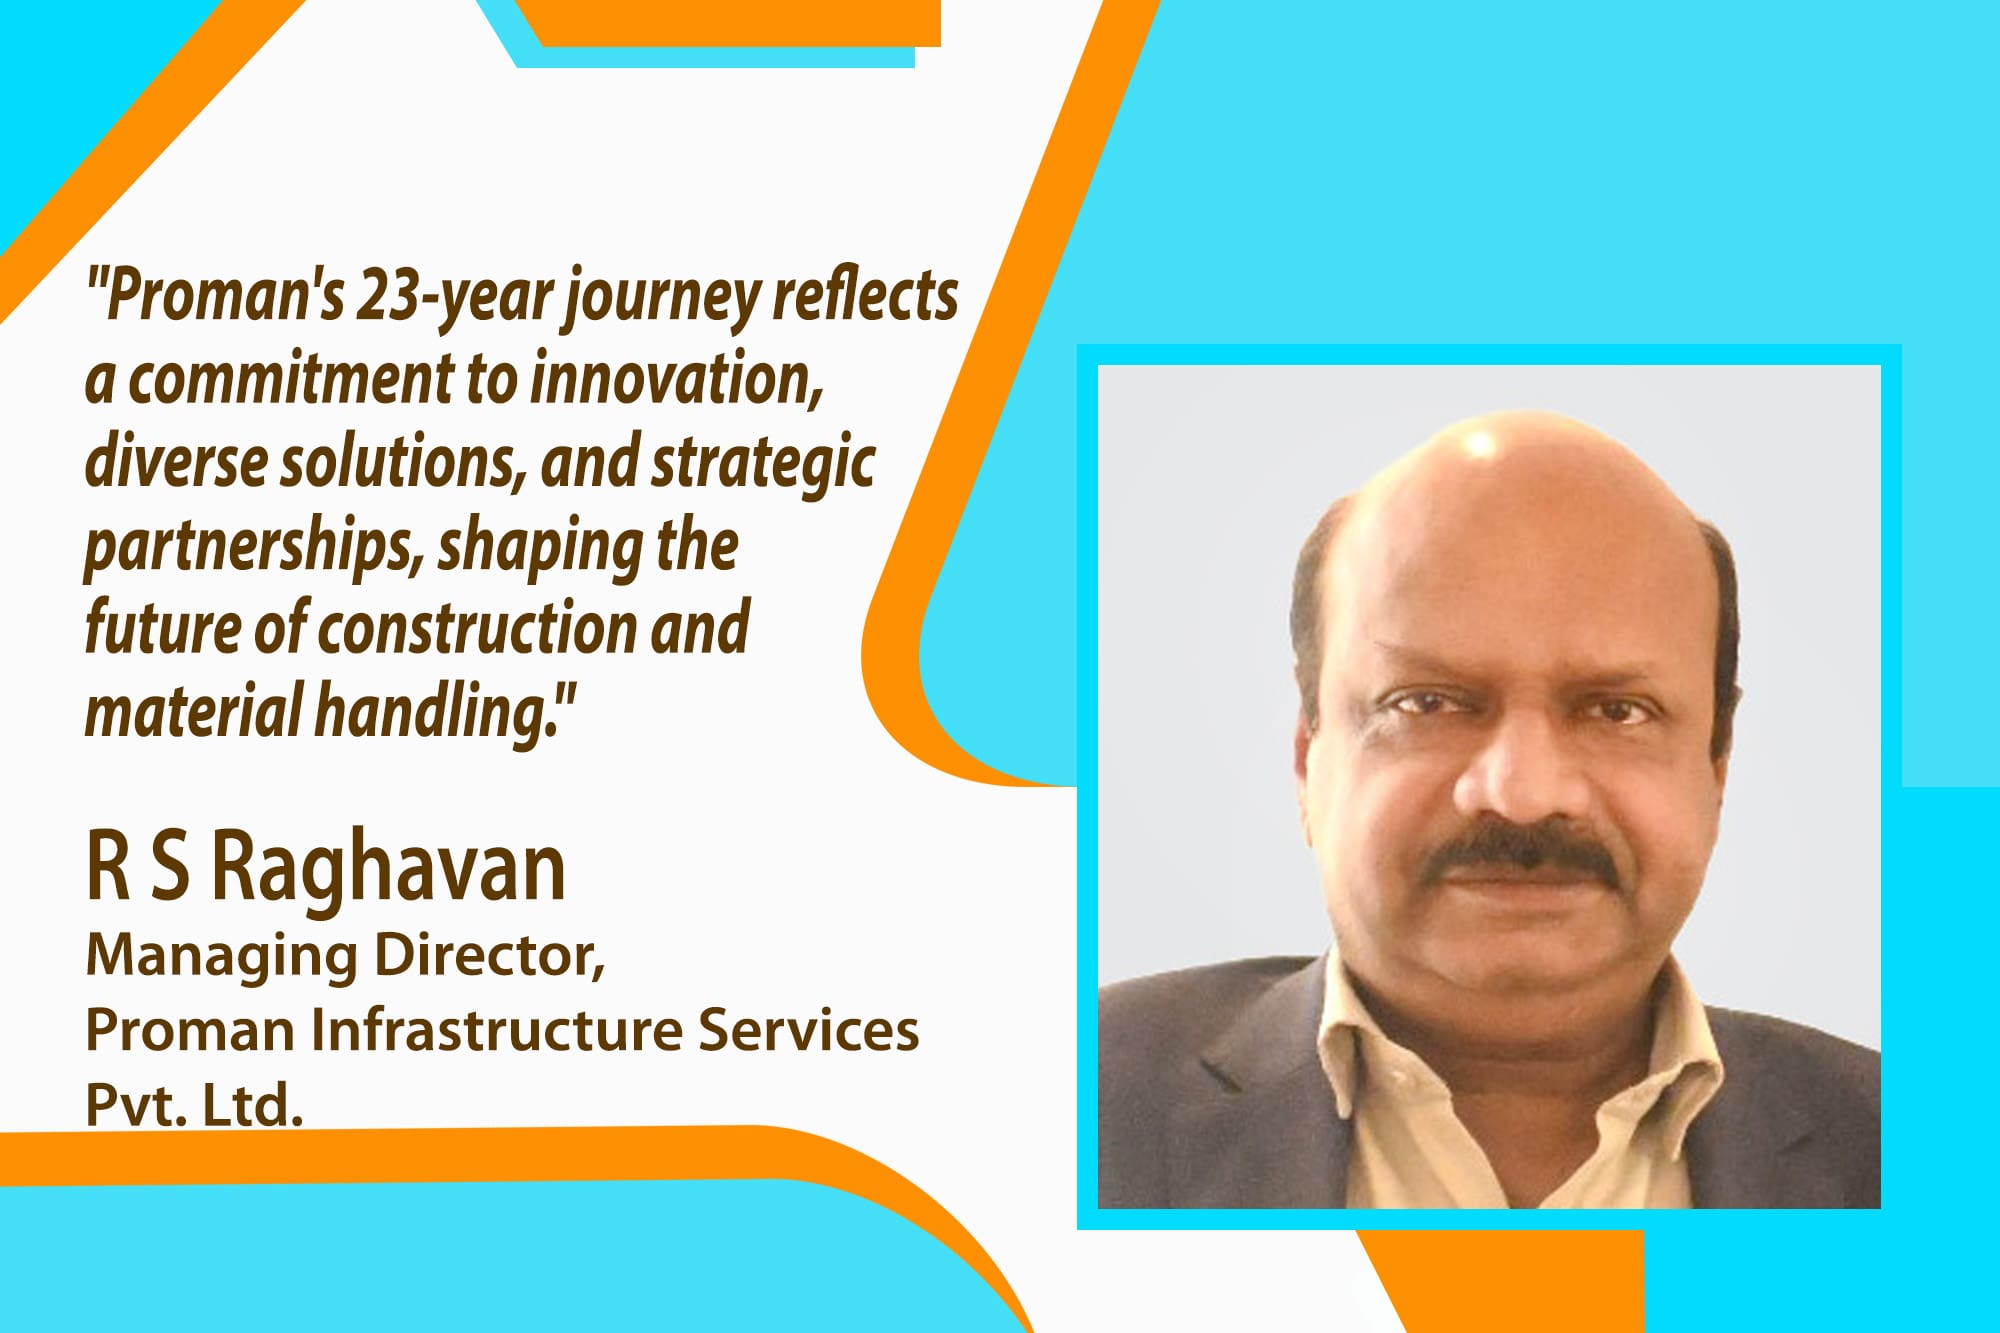 Raghvan R S, Managing Director, Proman, shares insights into Proman's dynamic evolution and strategic initiatives in the construction and material handling industries.